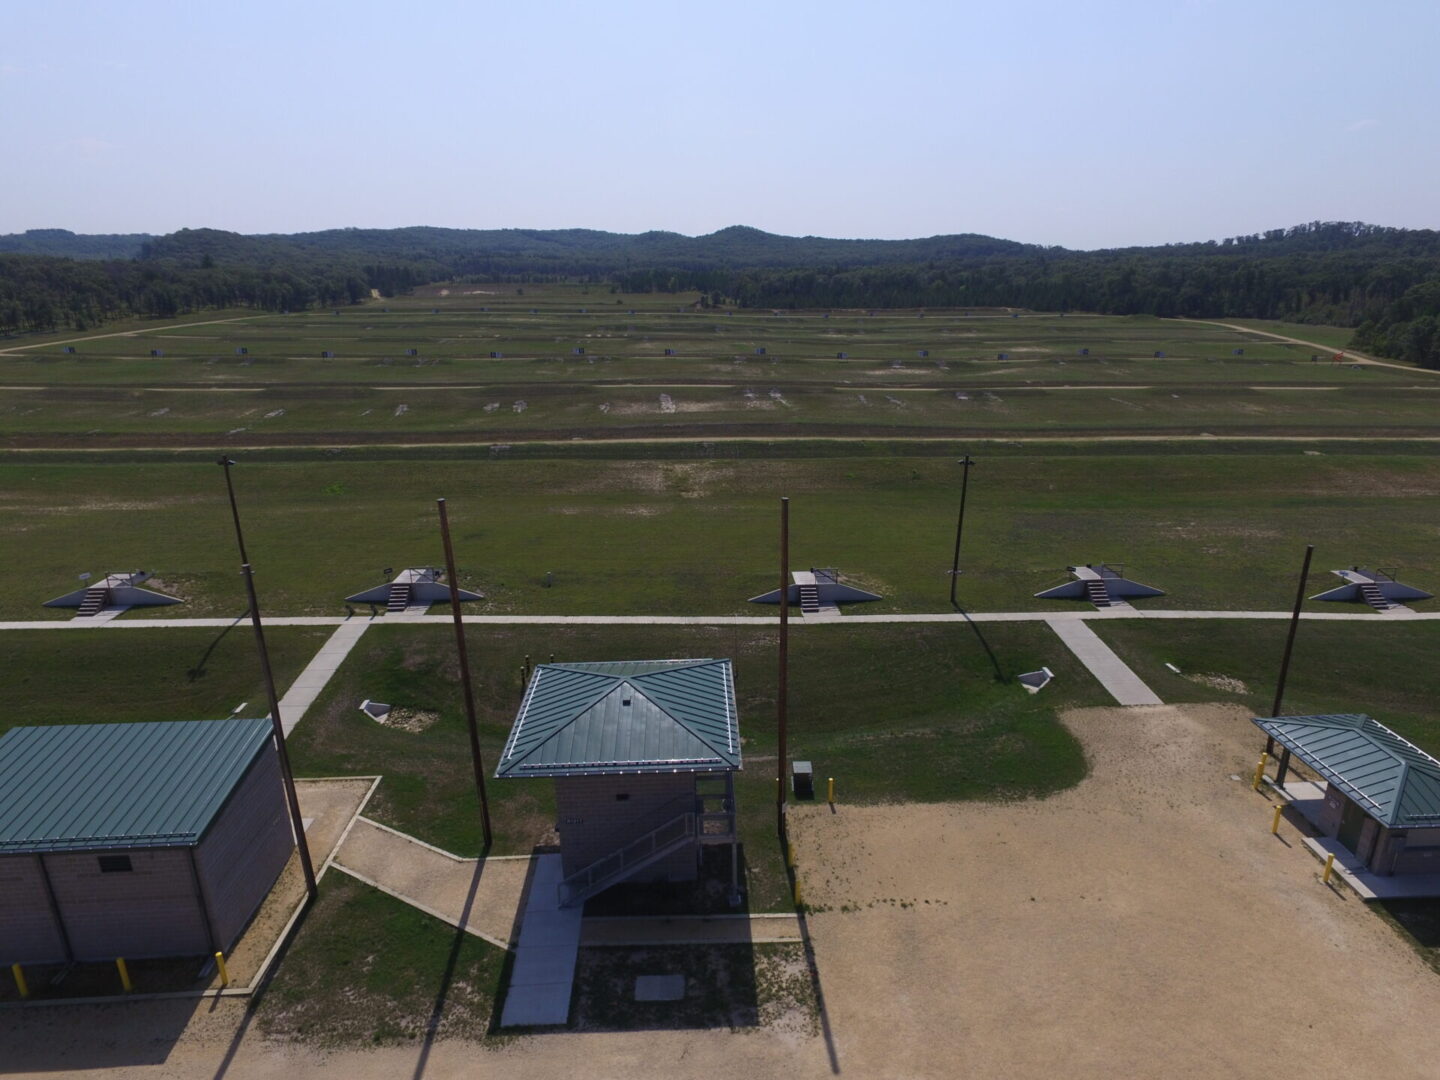 Aerial view of a wastewater treatment facility with several tanks and structures, surrounded by a grassy area.